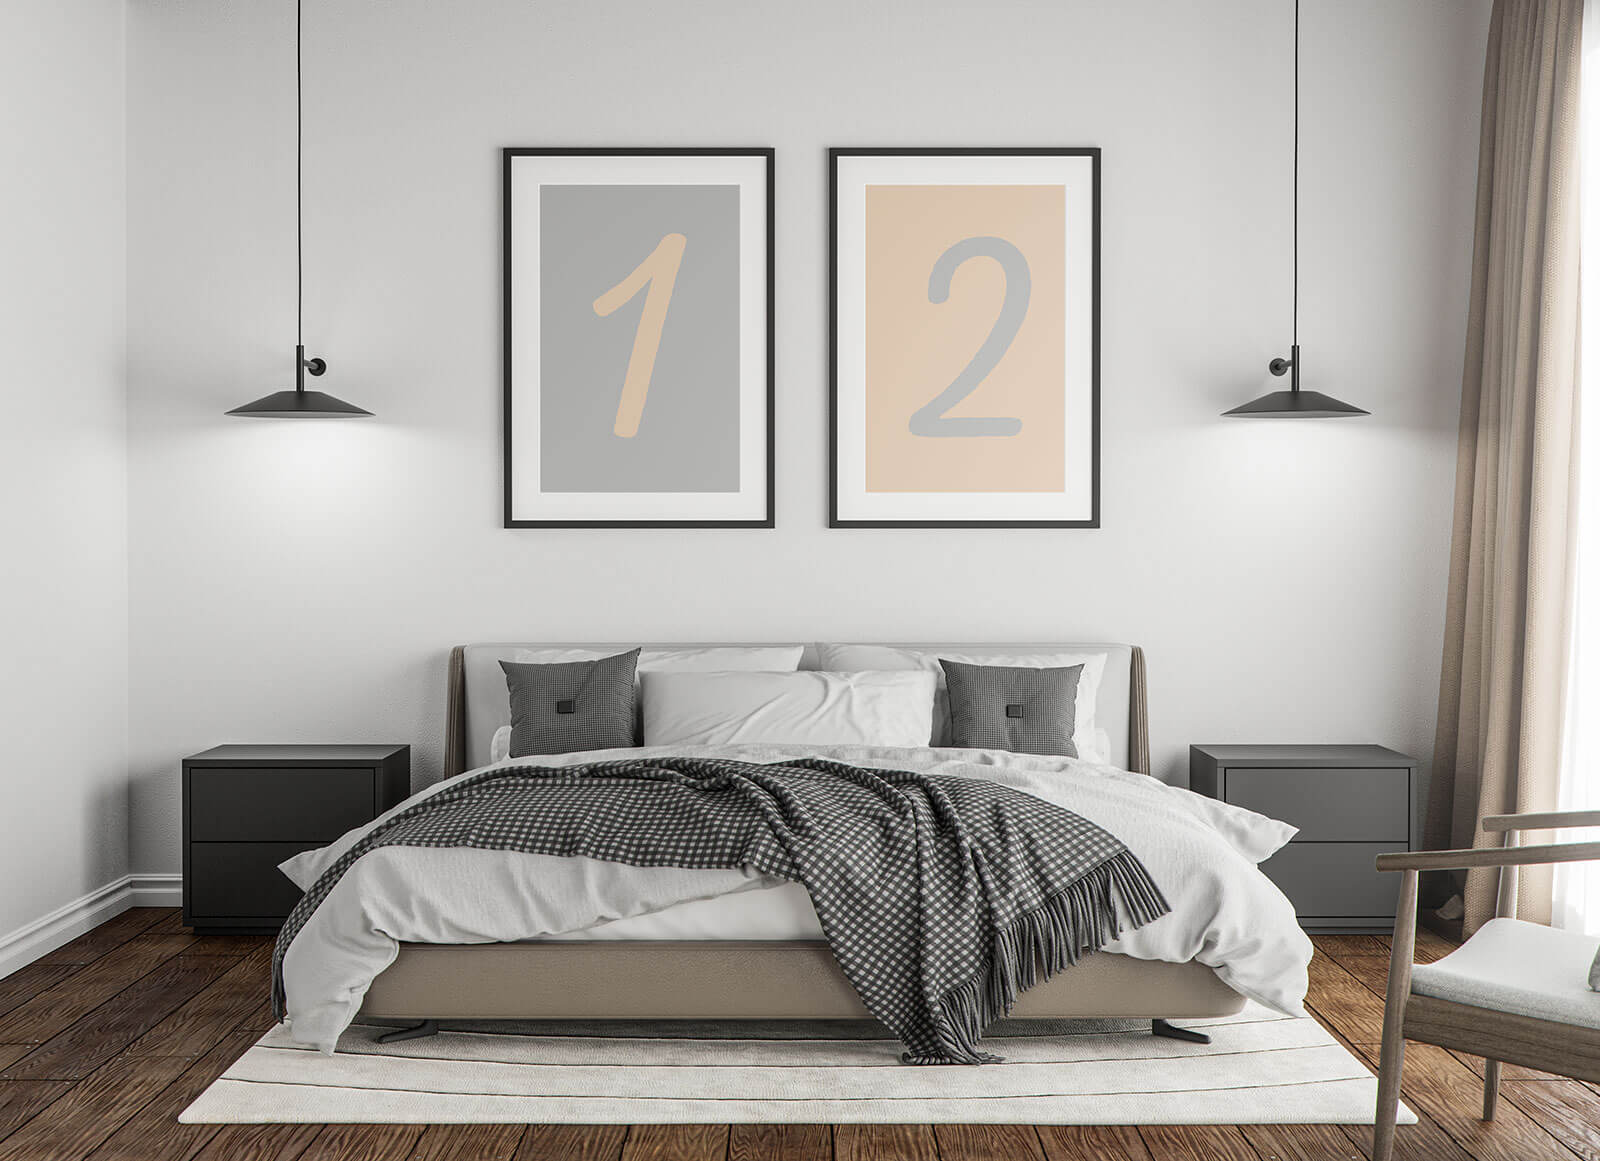 Free Bedroom Twin Poster / Photo Frame On Wall Mockup PSD